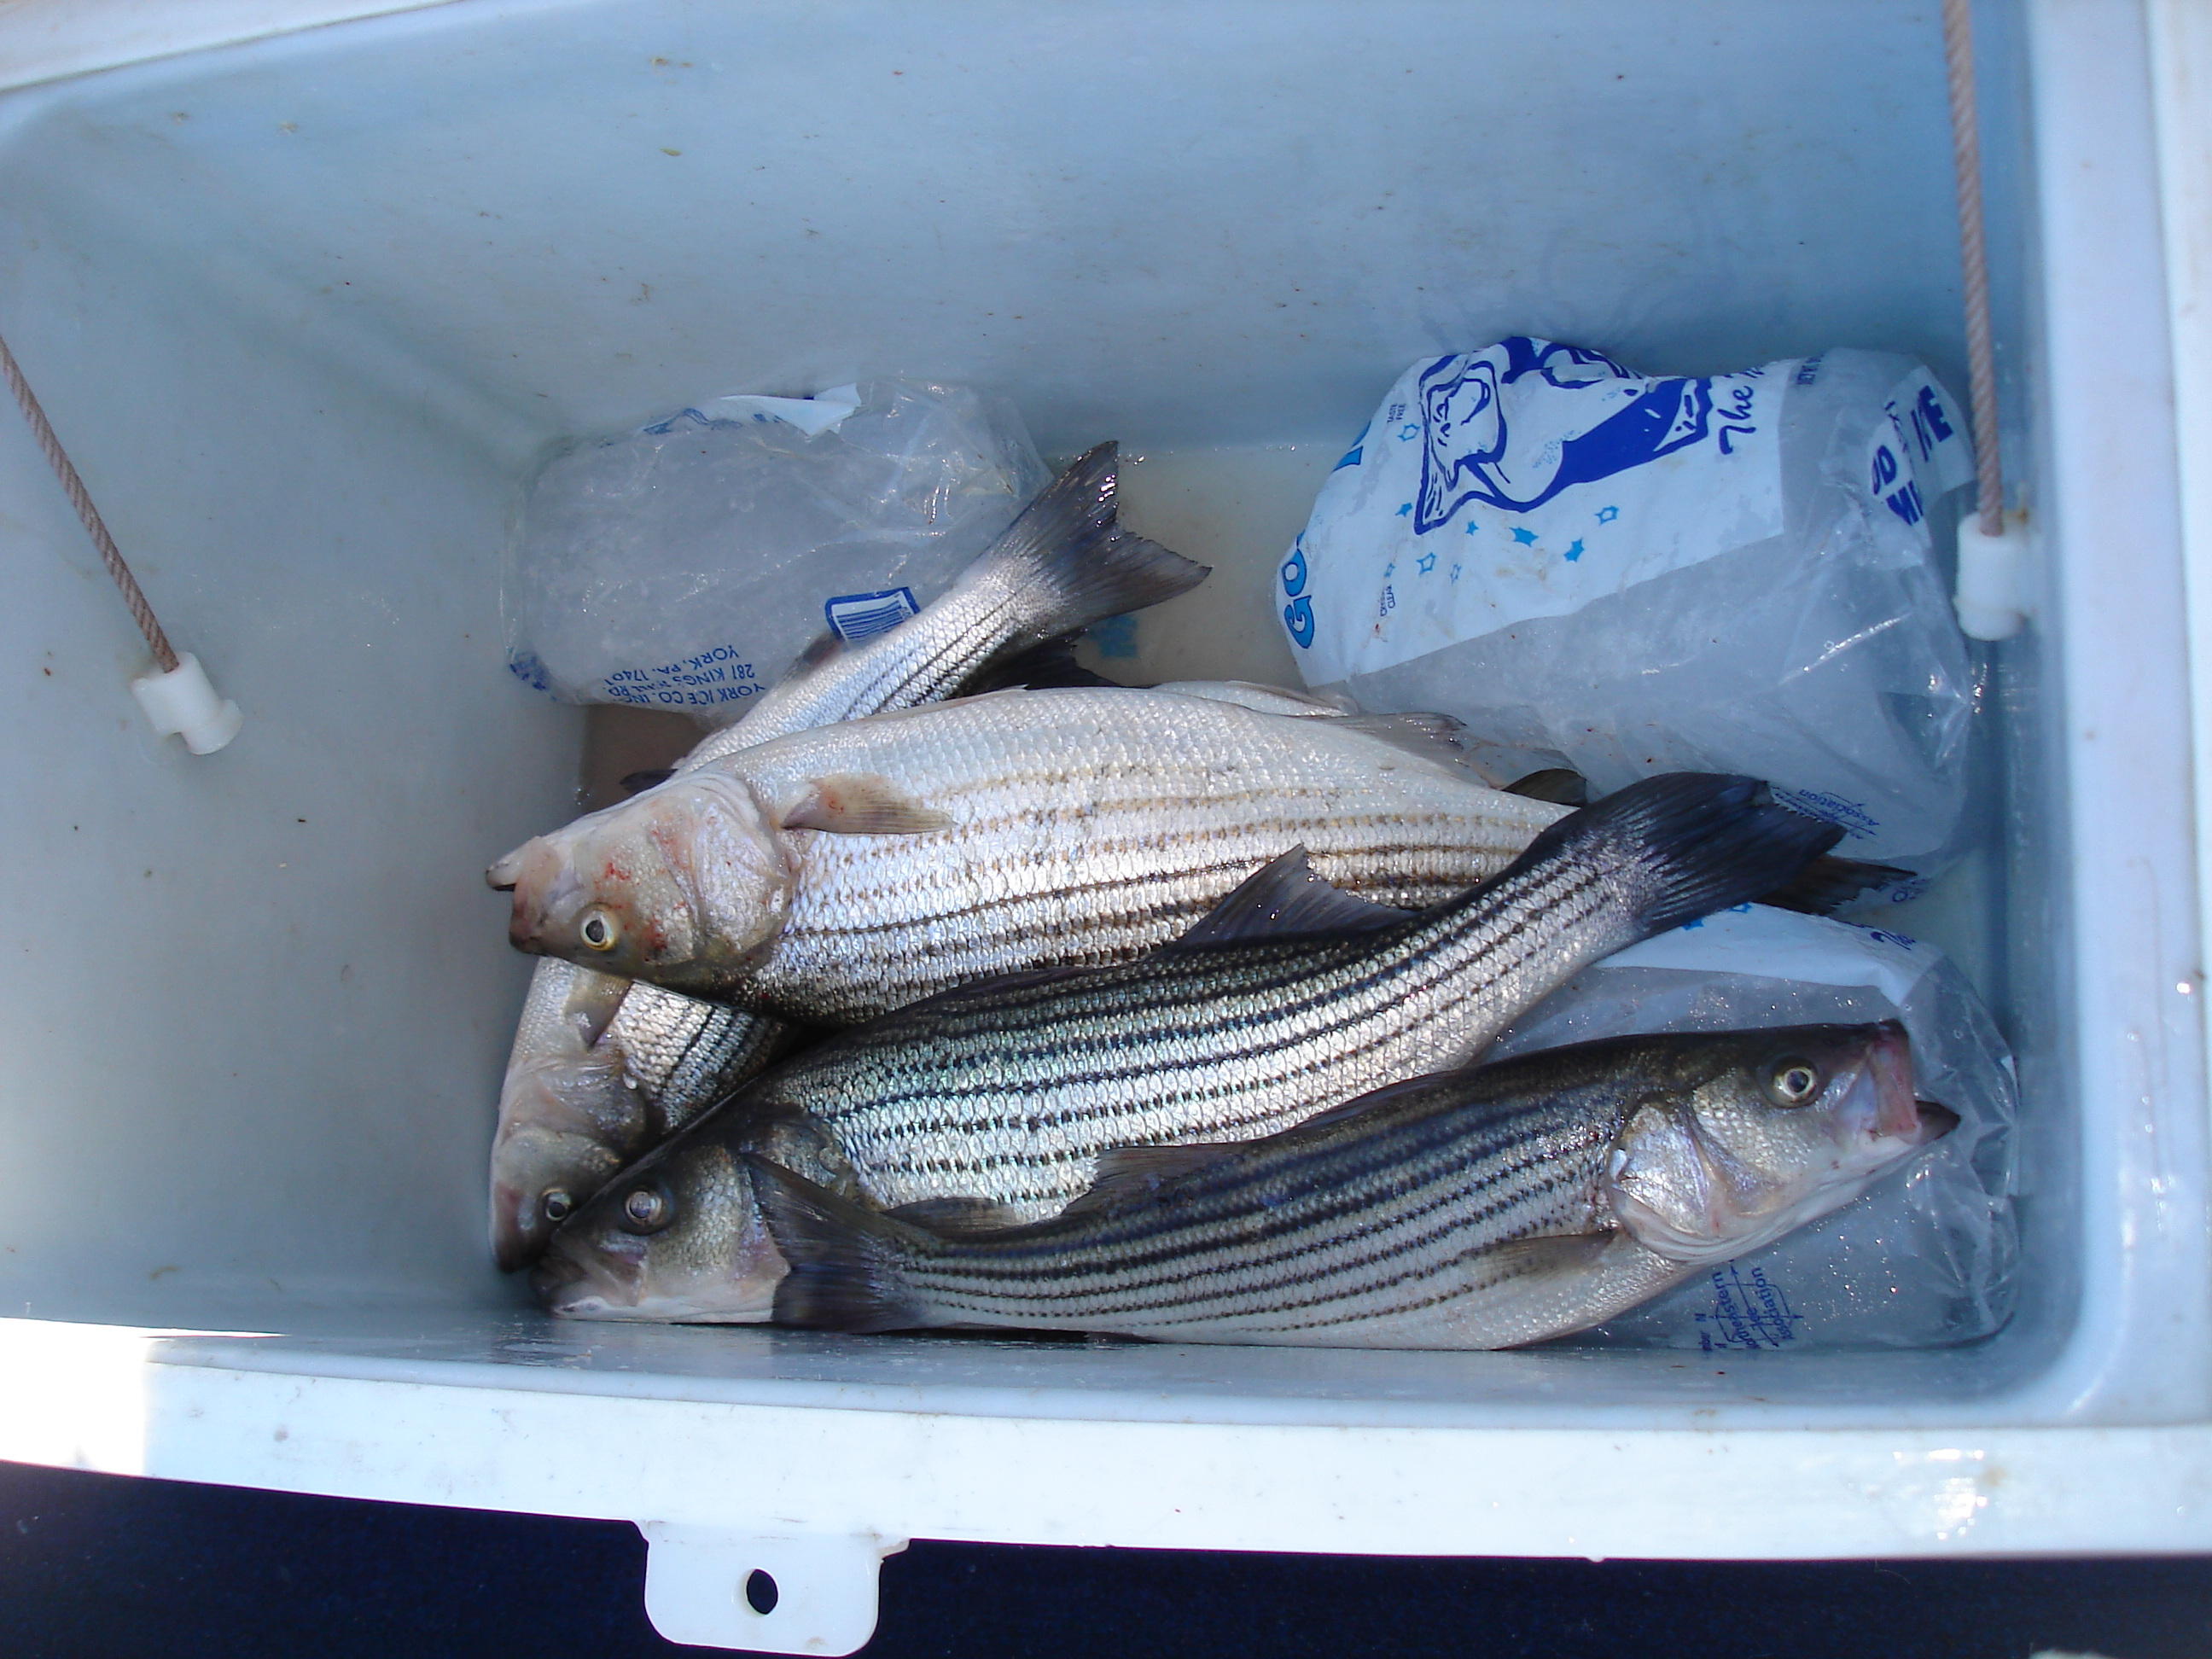 11/10/2010 Shultis  - Nice box of stripers